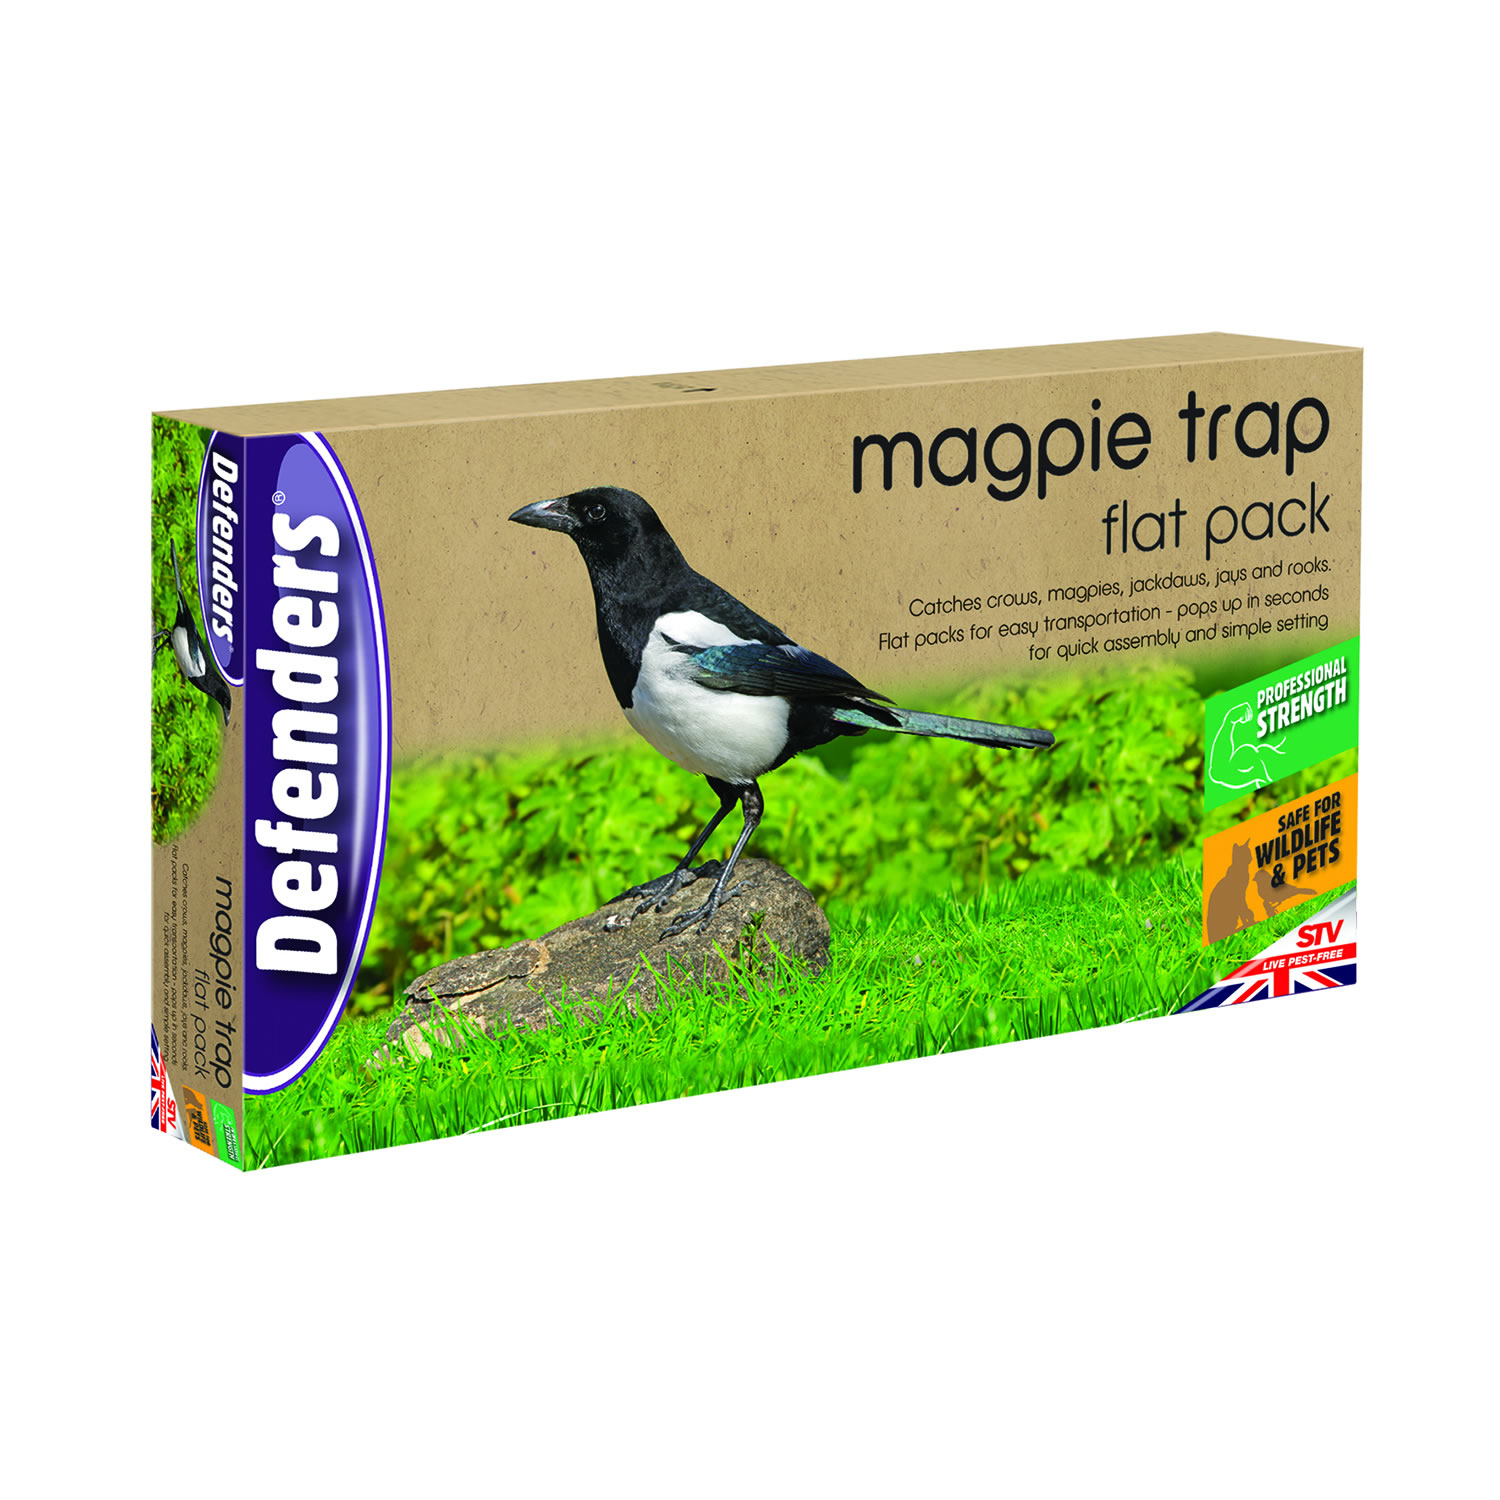 DEFENDERS MAGPIE TRAP FLAT PACK